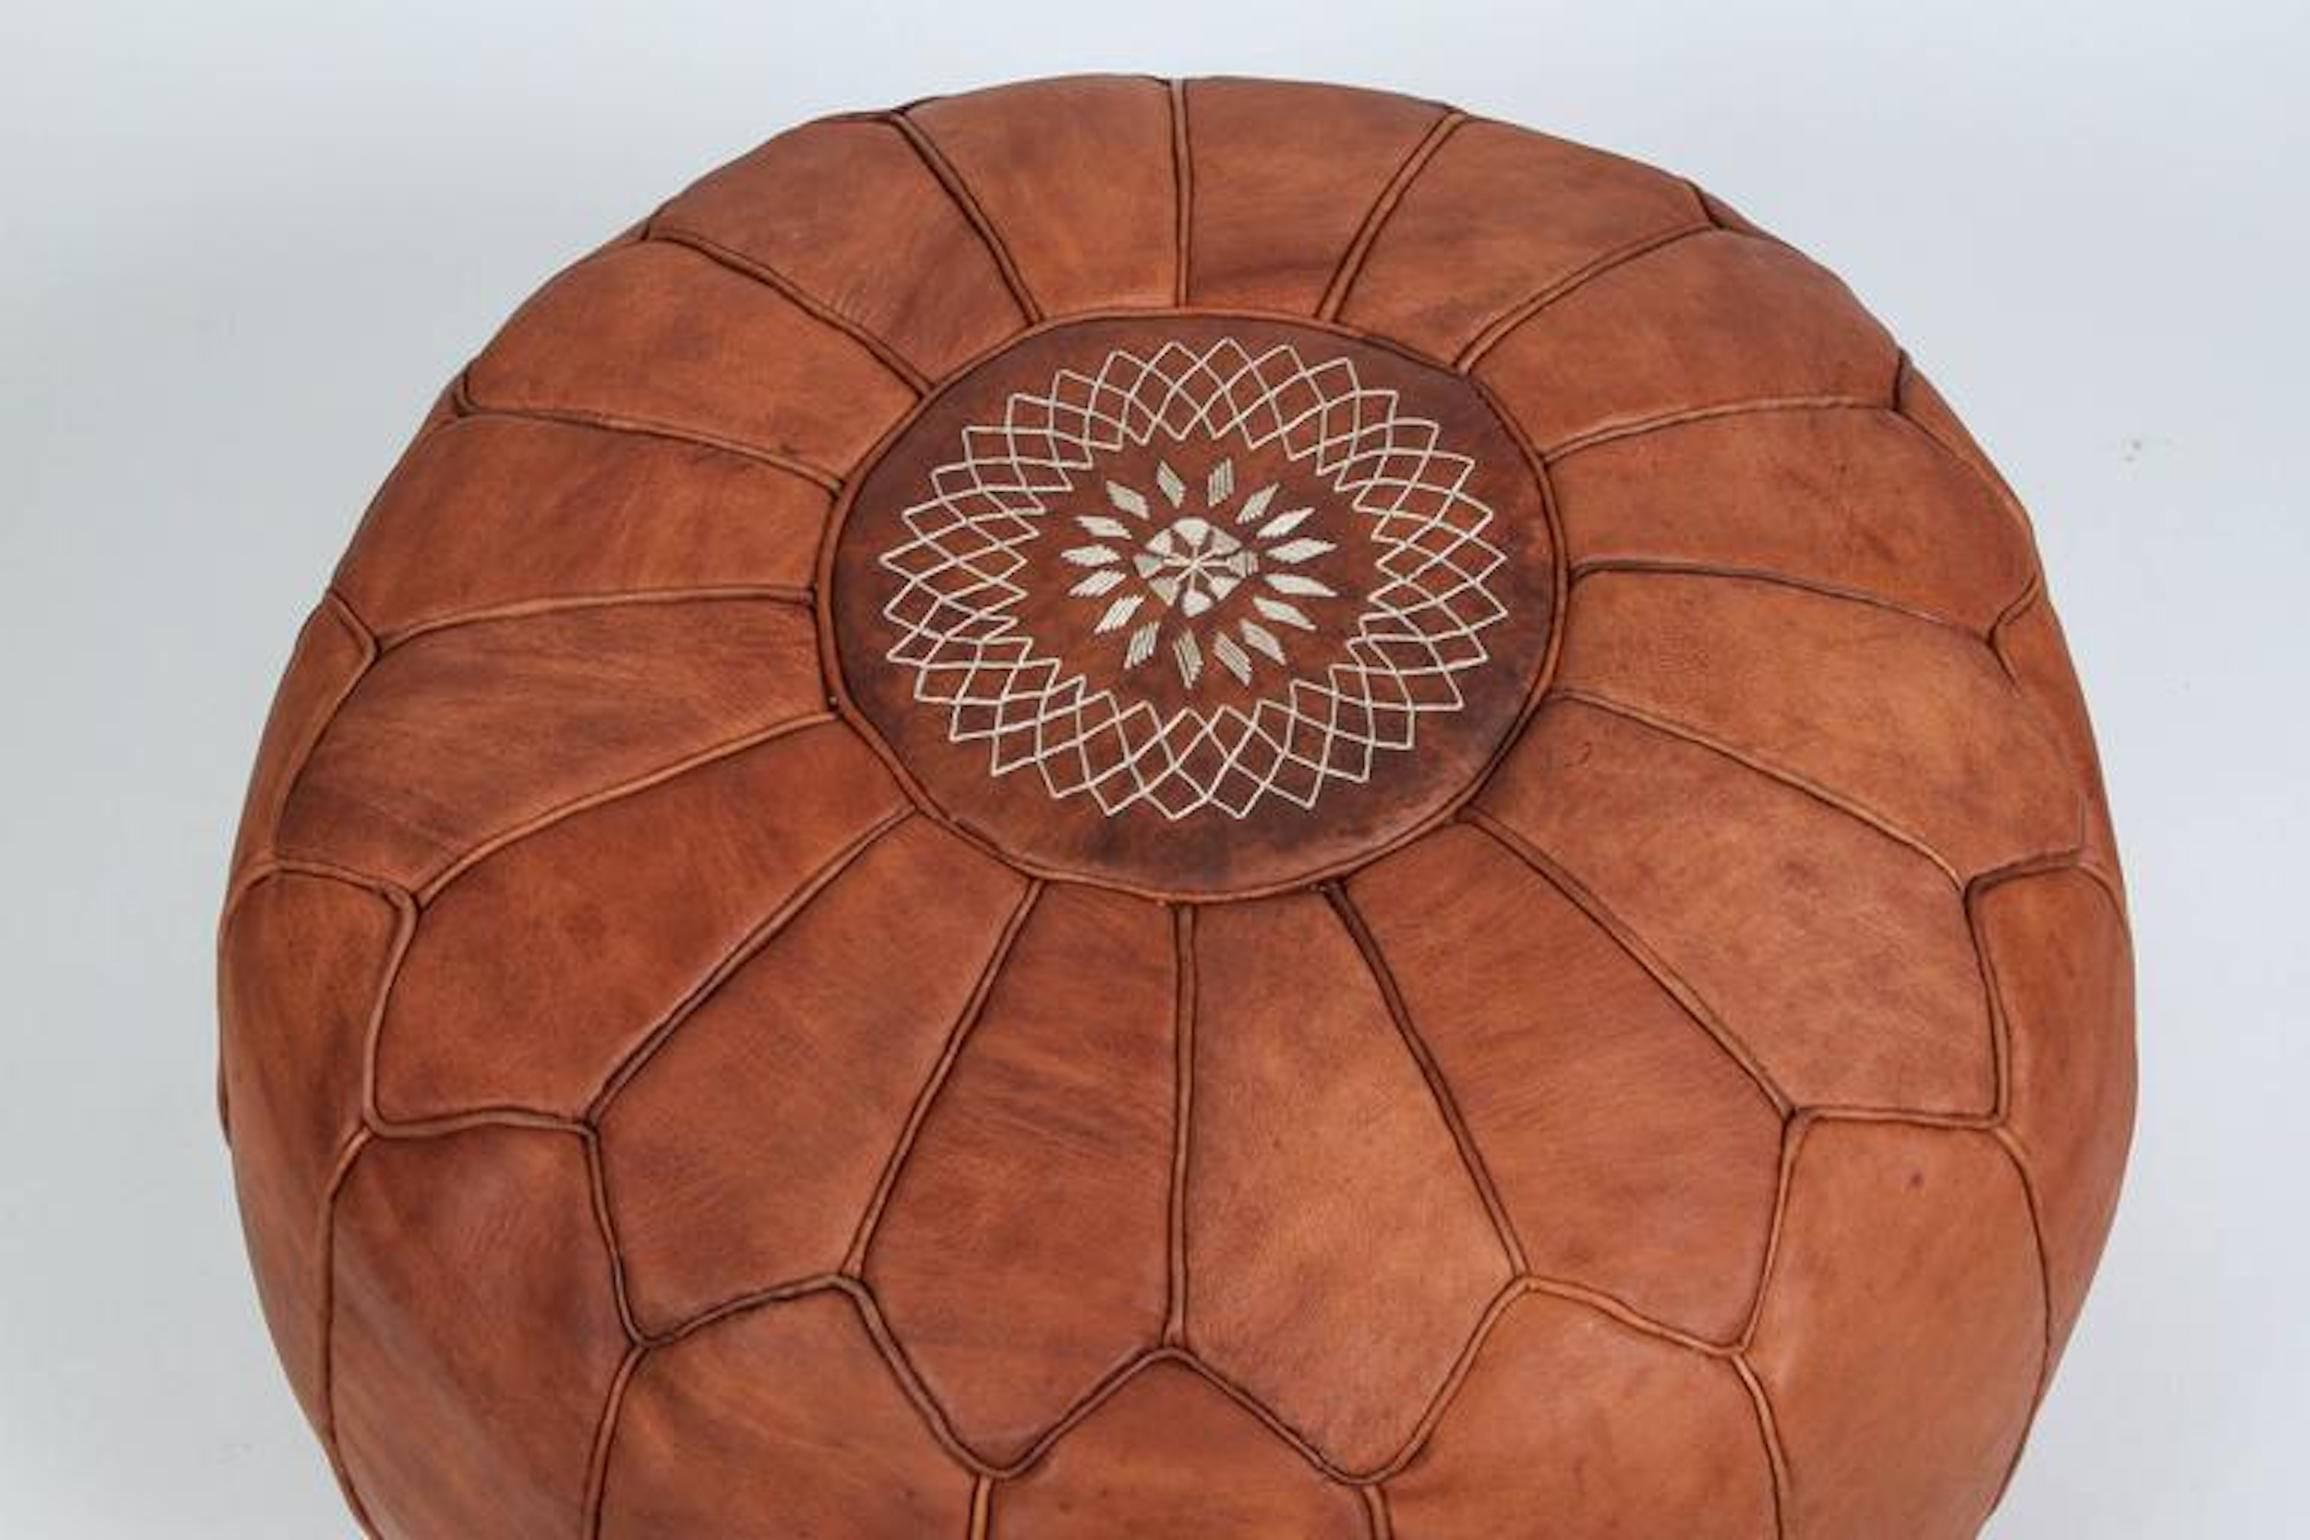 Large vintage round Moroccan leather pouf, handcrafted in brown camel leather.
Hand tooled and embroidered on the top with the Moorish star by Moroccan artisans in Marrakech.
Multiple available please contact us if you need more.
$1250 each.